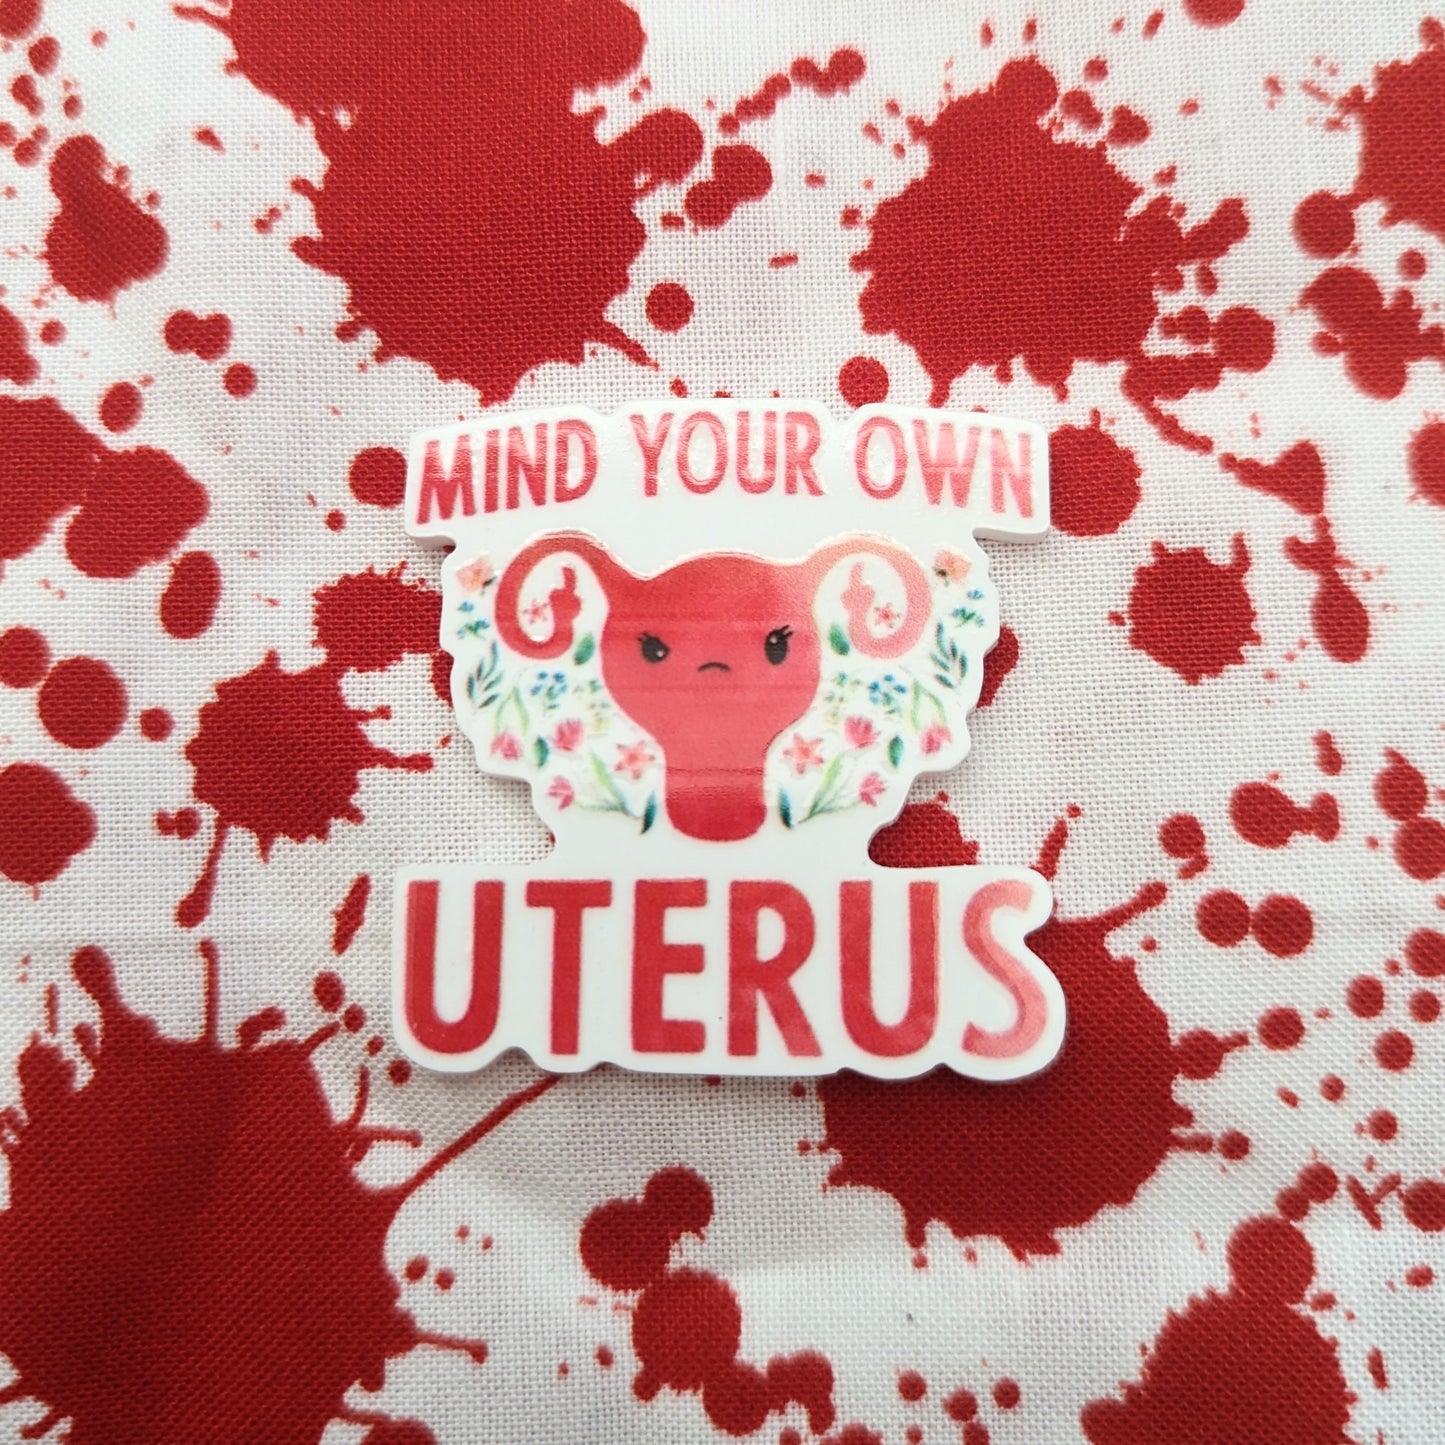 Mind Your Own Uterus pin